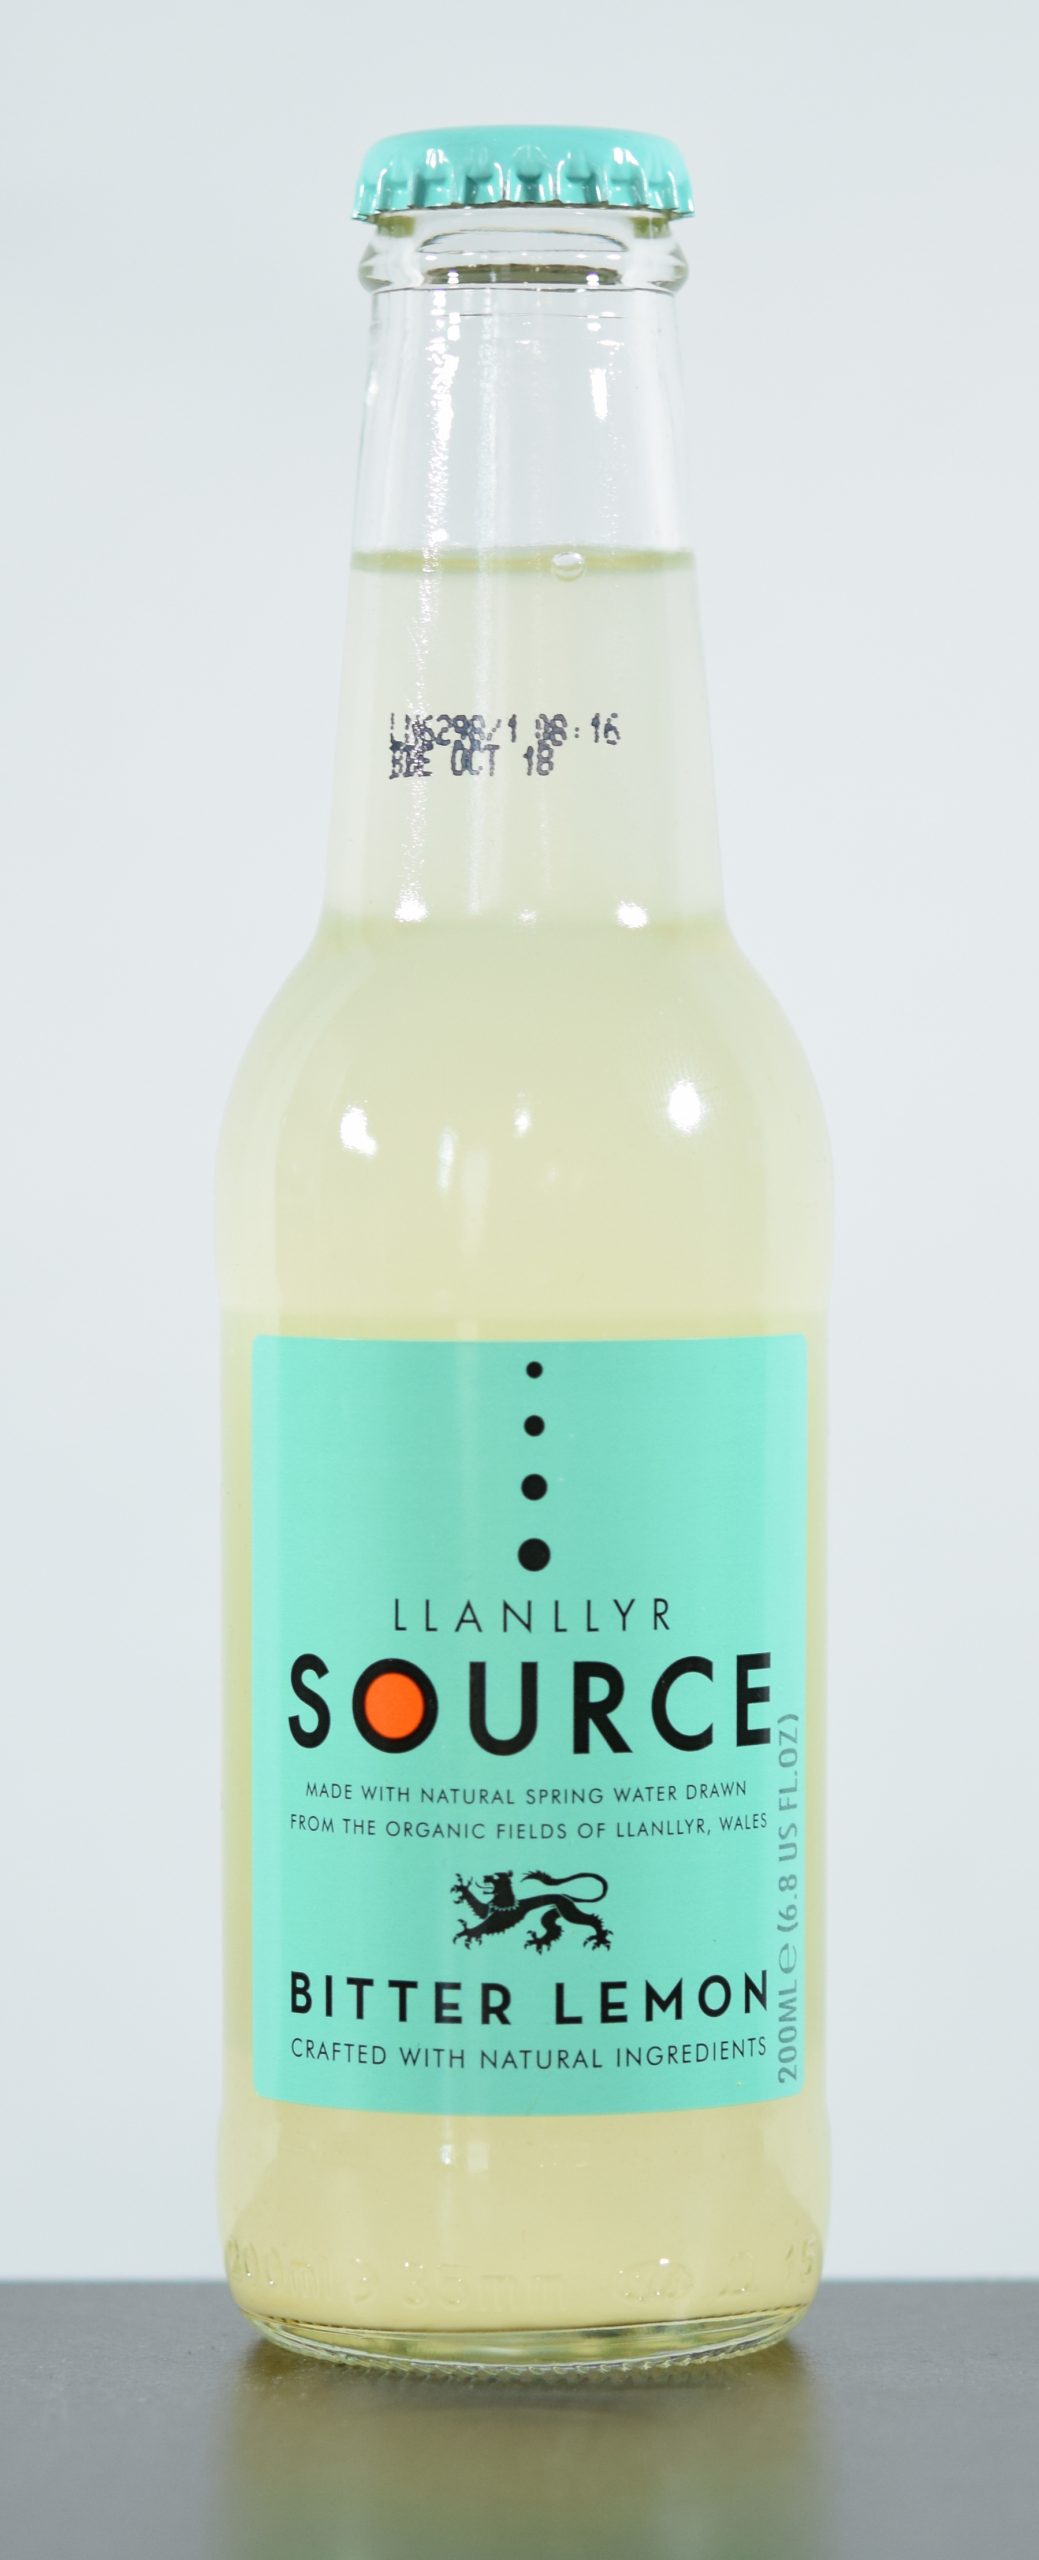 Llanllyr Source Bitter Lemon | Tonic Water Review and Tasting Notes